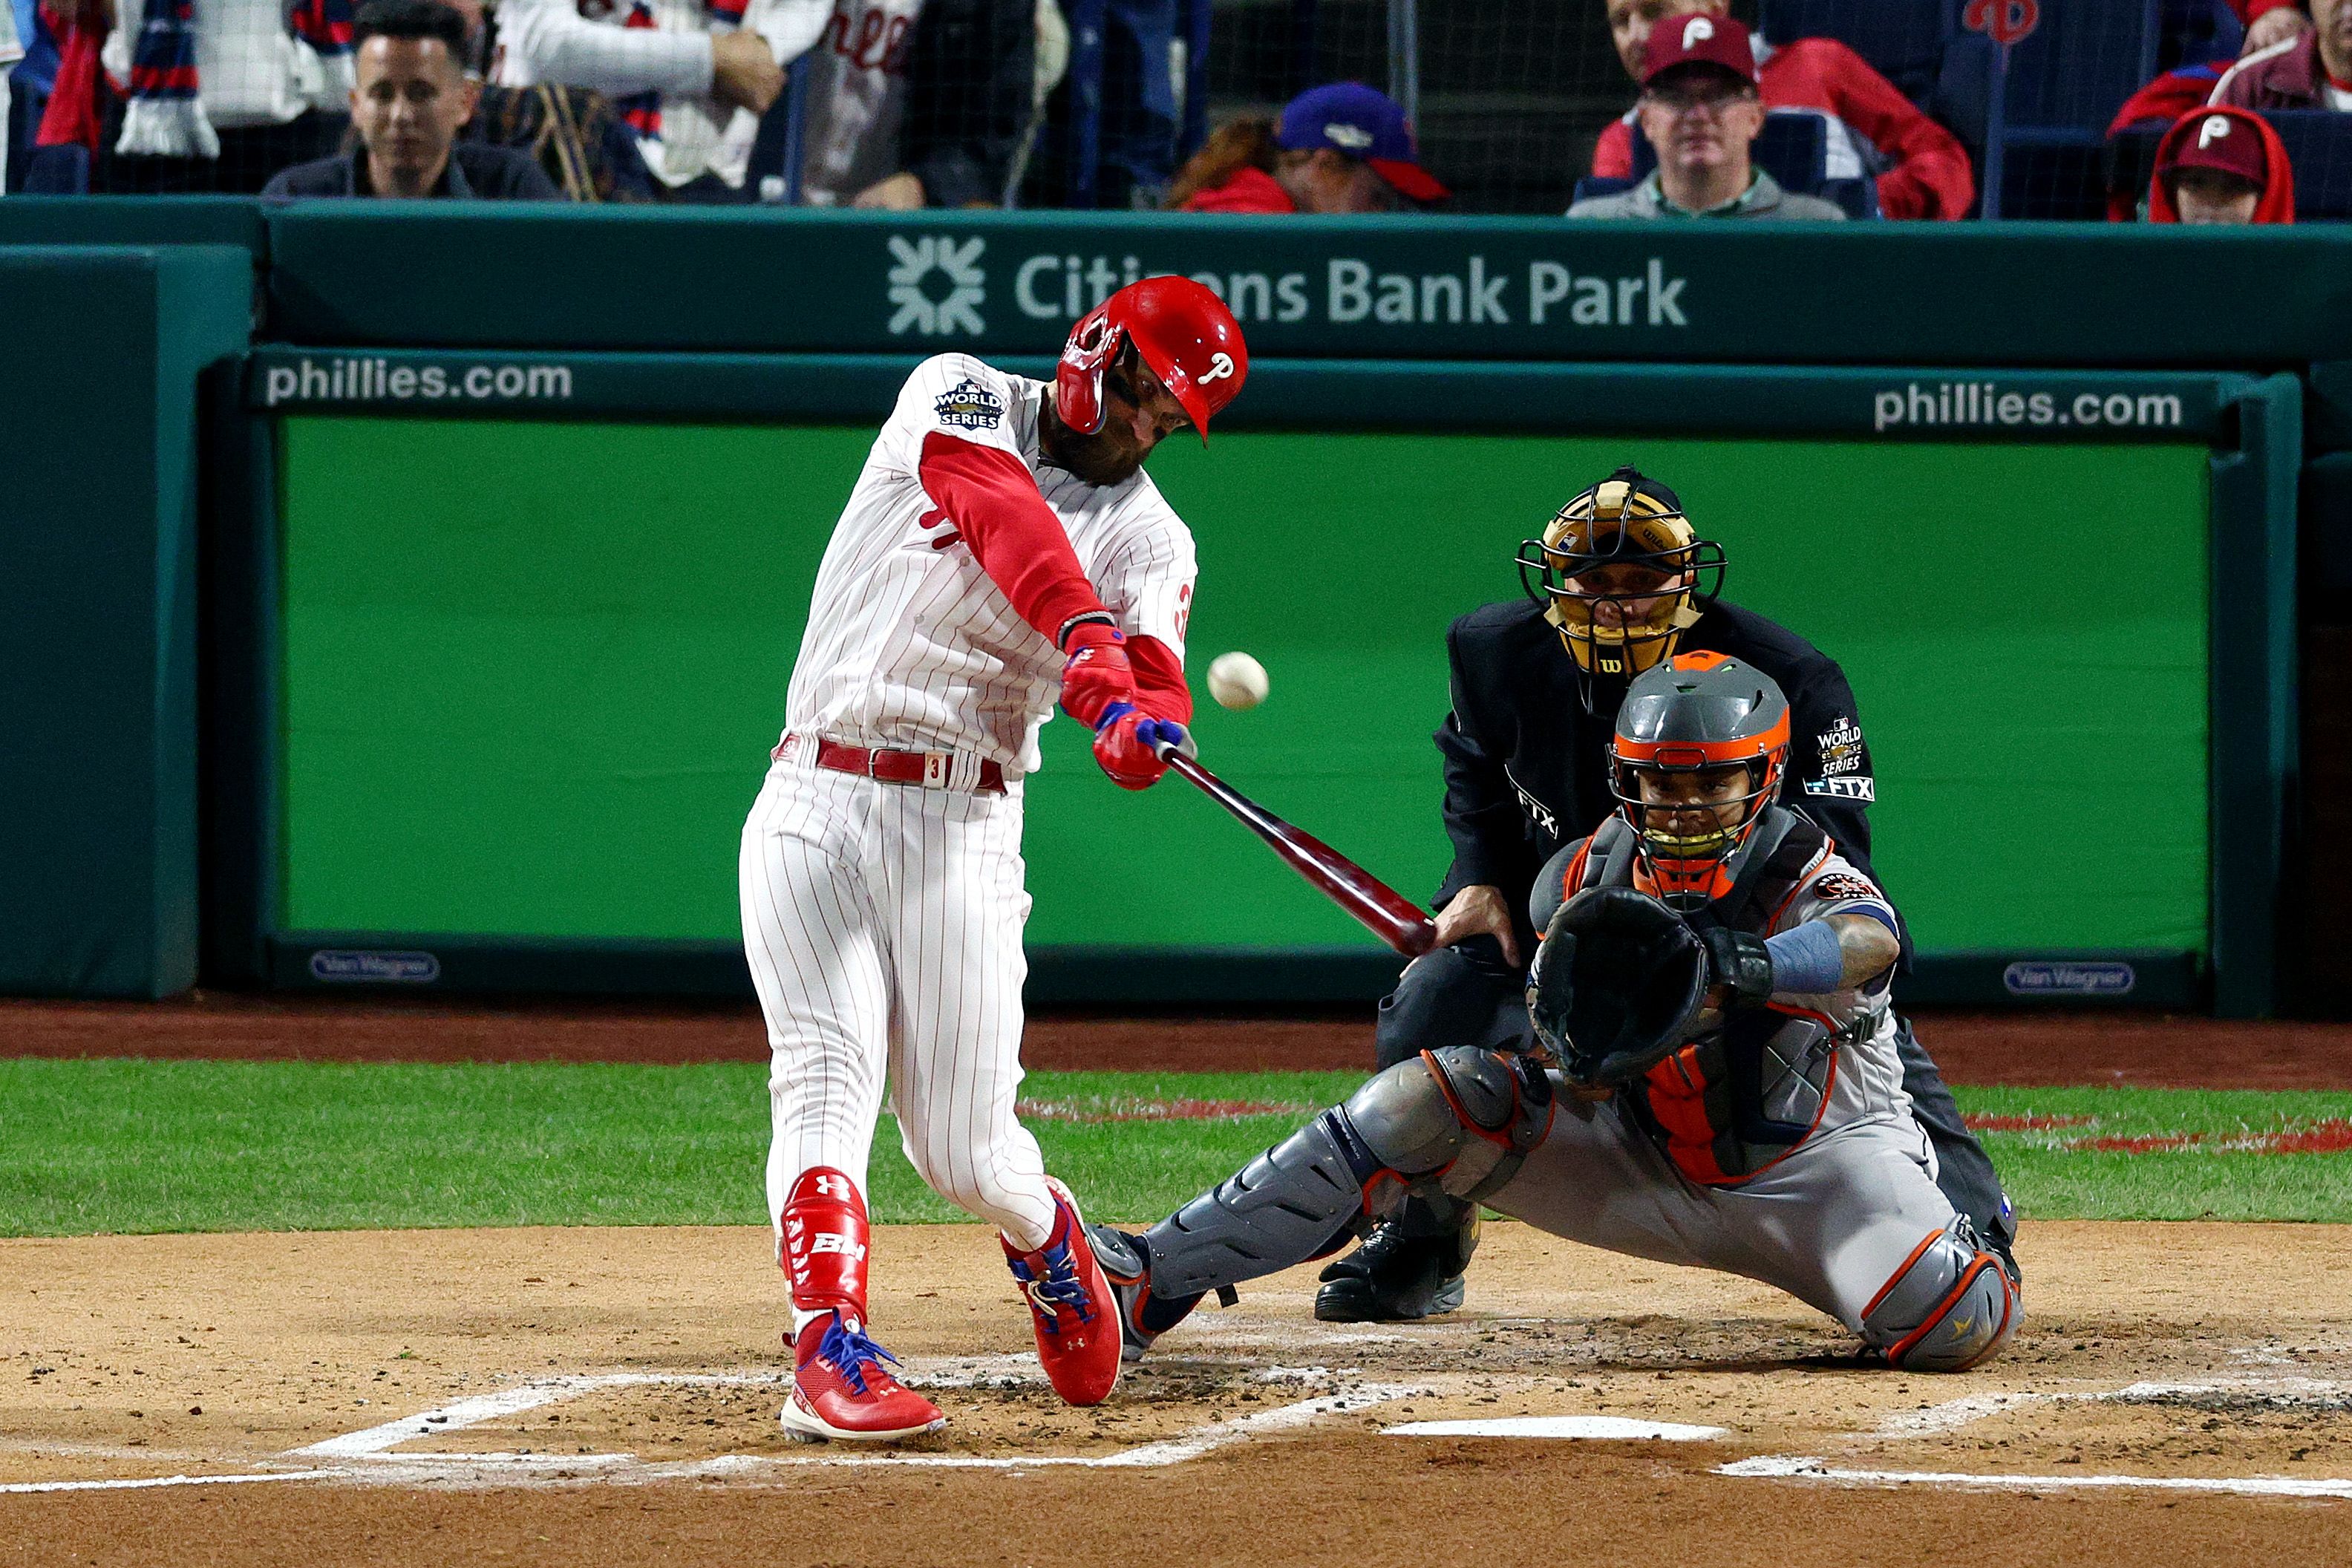 WATCH: Brandon Marsh Launches Home Run to Give Phillies 3-0 Lead